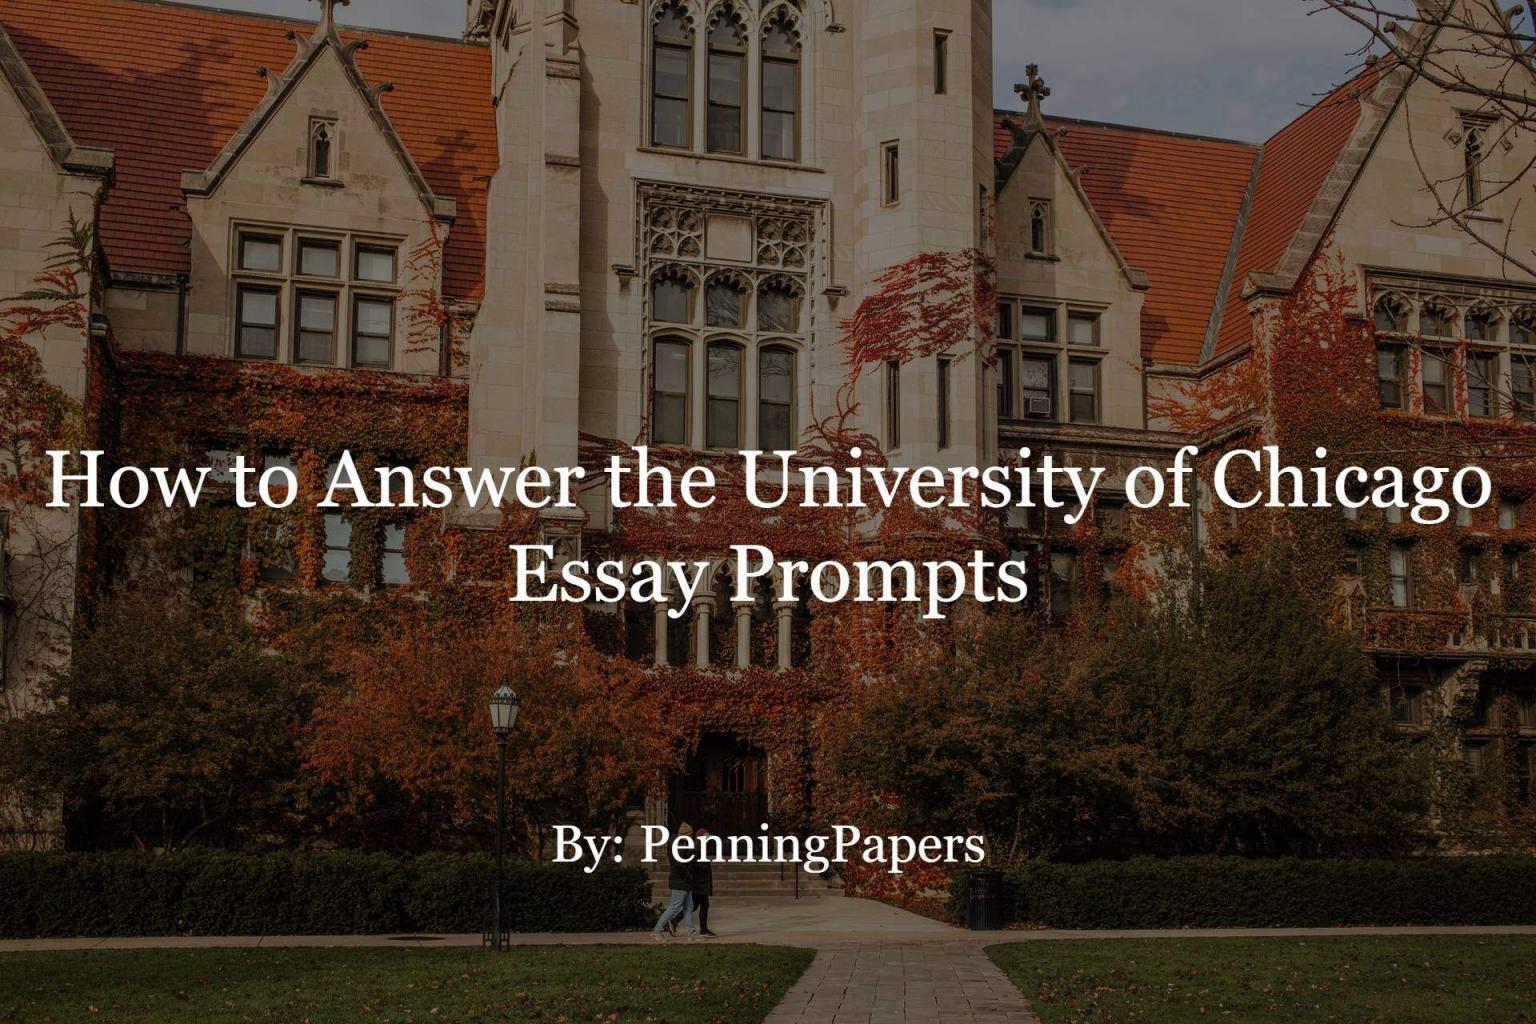 essay prompts for university of chicago